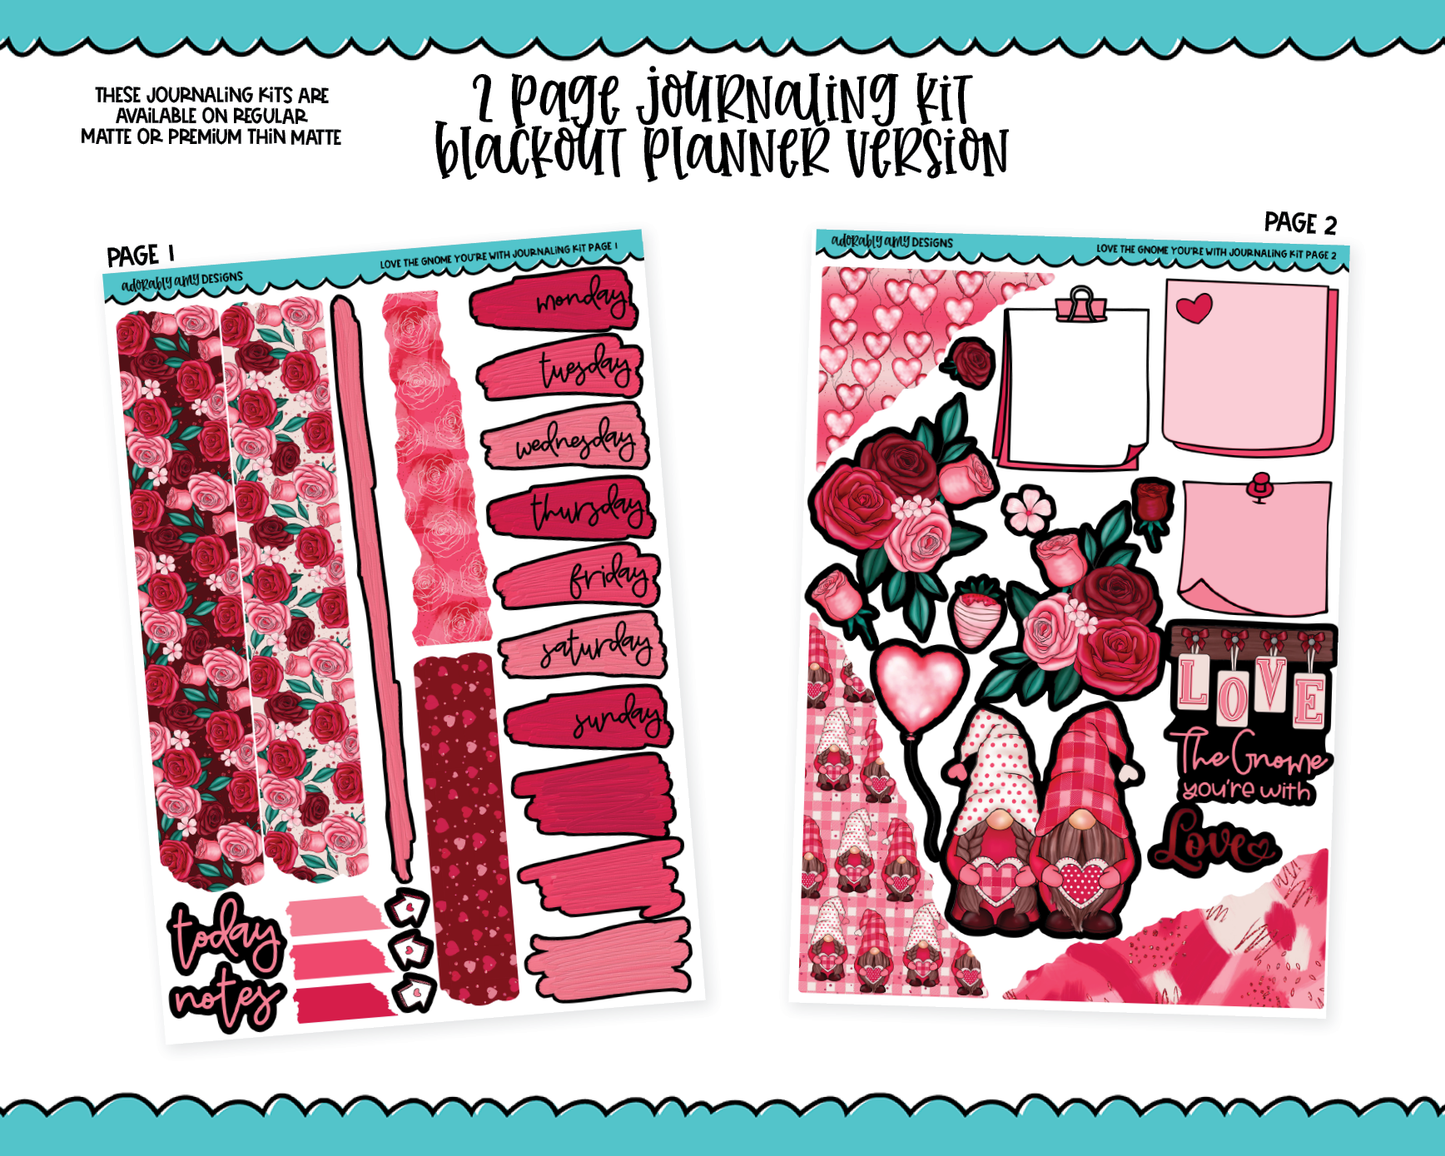 Journaling Kit Love the Gnome You're With Valentine Holiday Themed Planner Sticker Kit in White OR Black for Blackout Planners